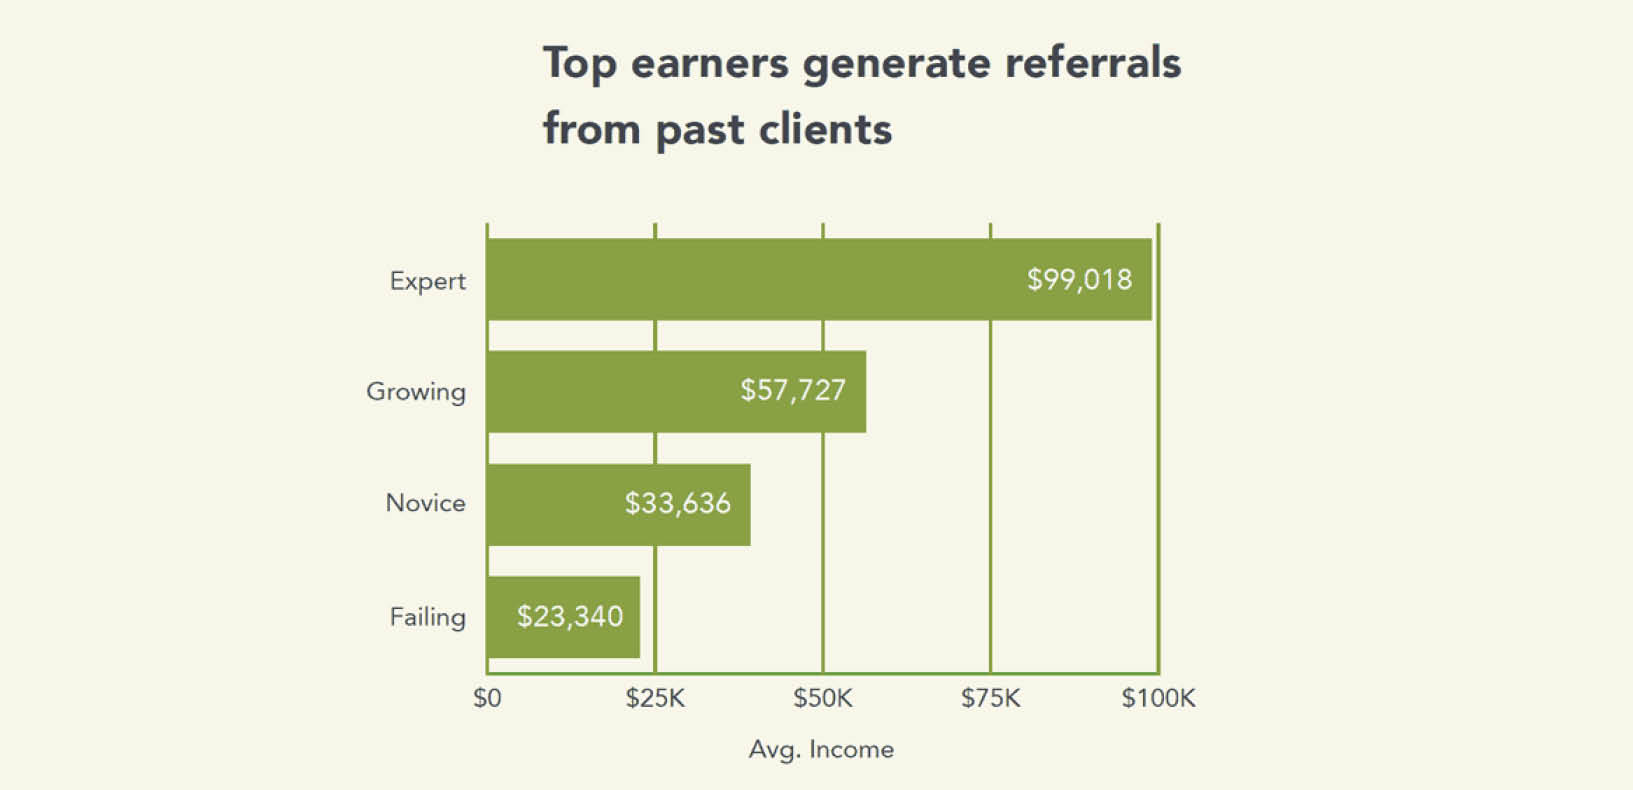 A bar graph titled top earners generate referrals from past clients. The vertical bar or Y axis represents the level of expertise an agent has generating referrals, and the data points are expert, growing, novice, and failing. The horizontal bar or X axis is labeled average income and the data points are zero dollars, 25 thousand dollars, 50 thousand dollars, 75 thousand dollars, and 100 thousand dollars. The graph shows that agents who are experts have an average income of 99,018 dollars; agents who are growing have an average income of 57,272 dollars; agents who are novice have an average income of 33,636 dollars, and agents who are failing have an average income of 23,340 dollars.